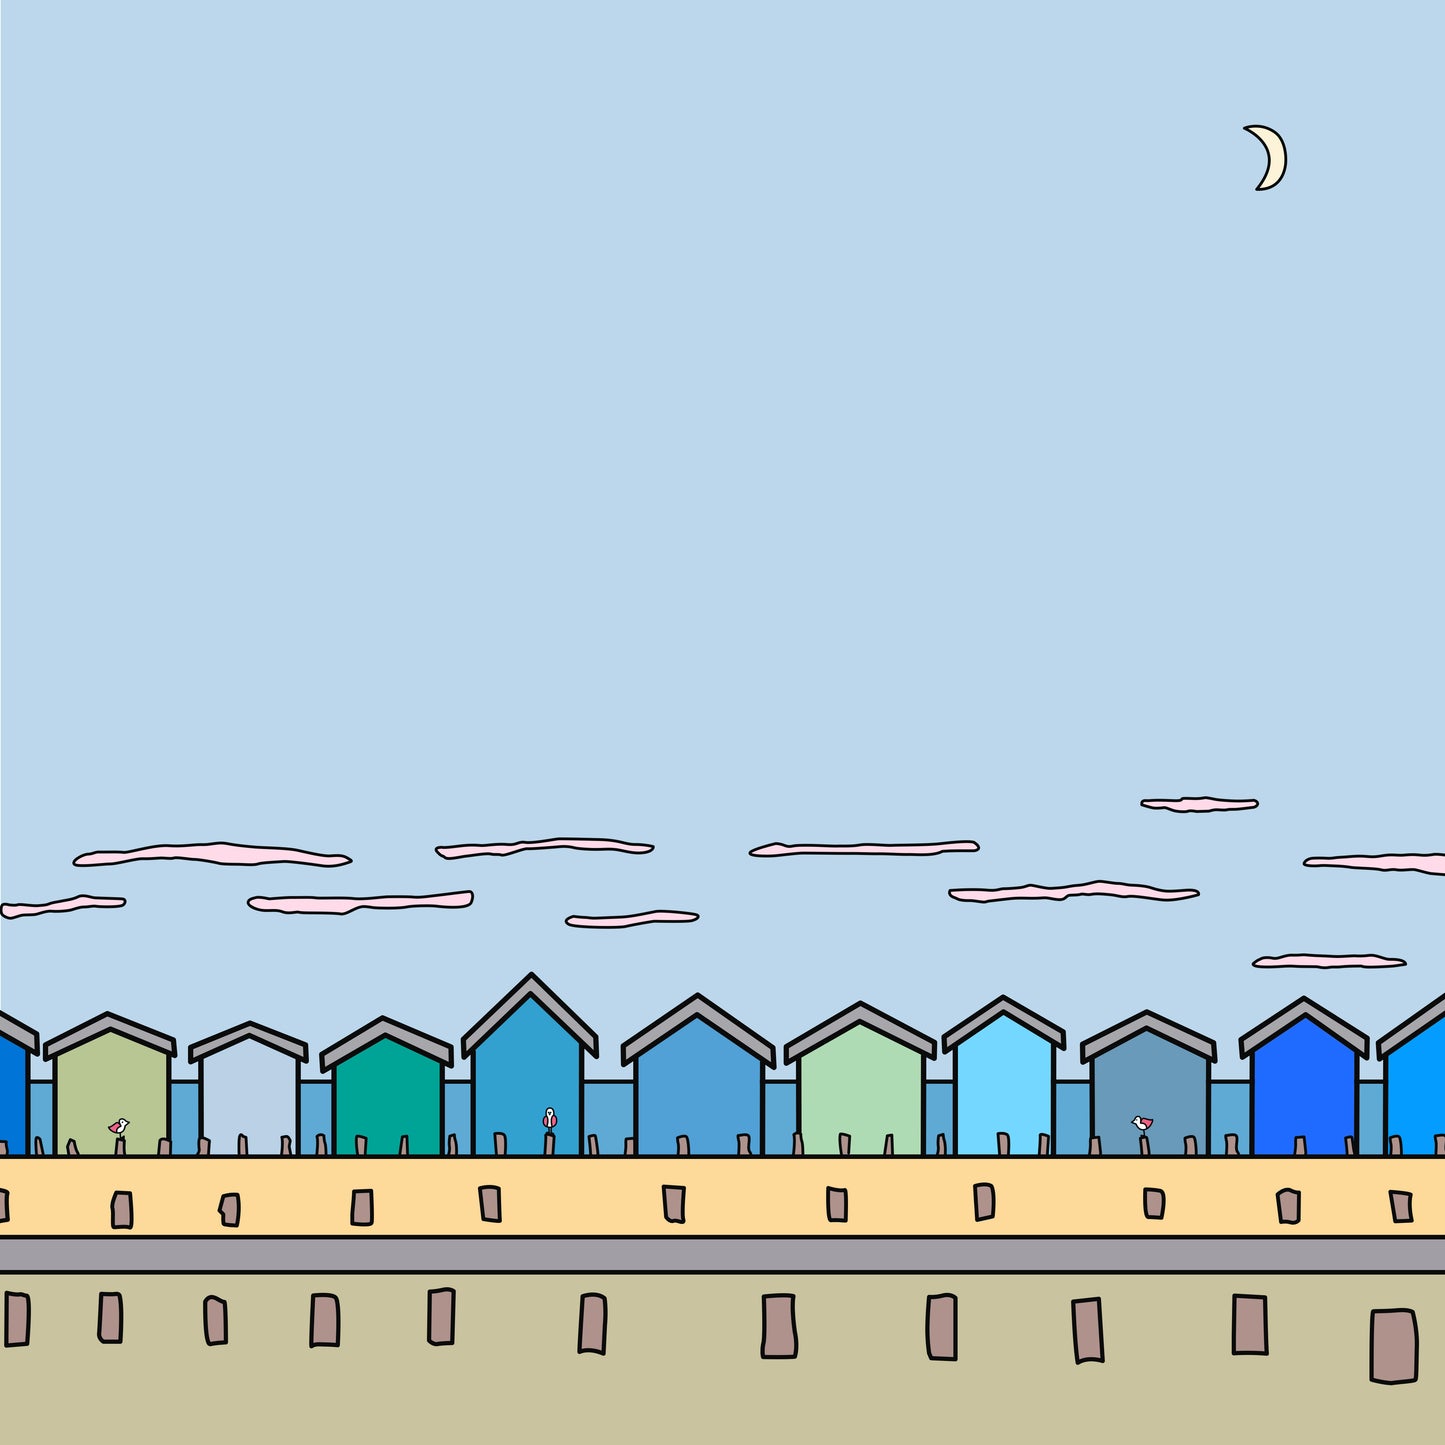 Multiple beach huts are in a row with groynes that have three small pink winged seagulls. The beach huts are in shades of greens and blues on a sandy beach and a strip of blue for the sea in the background. Above the beach hut are thin streaky clouds and above a large pale blue sky with a small half moon in the top right corner. All the details, colours and shapes are outlined in thick black.